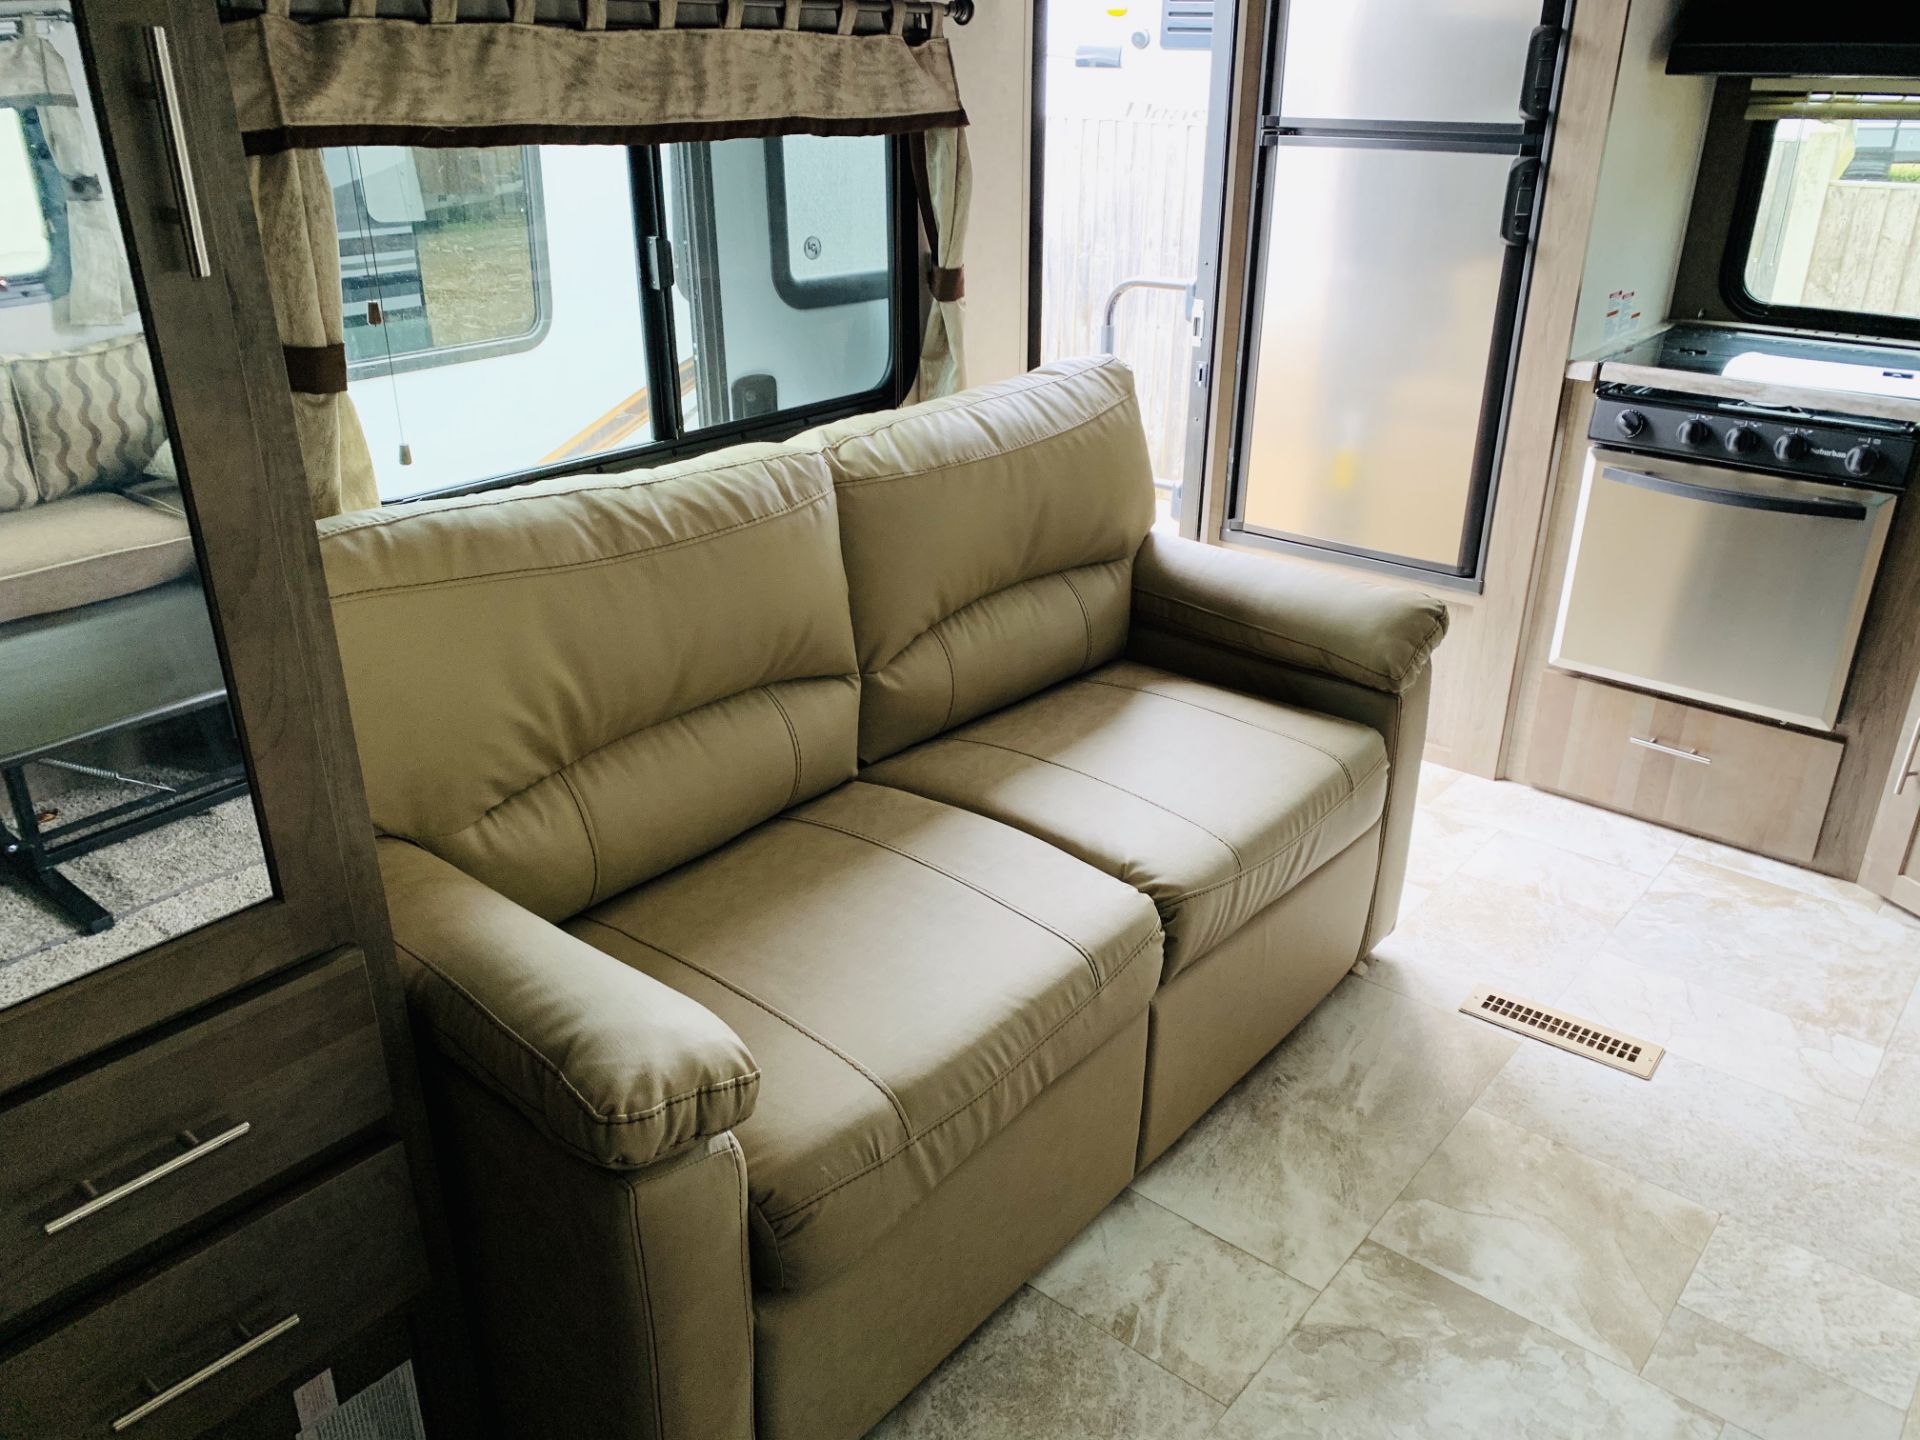 ** ON SALE ** Forest River Surveyor 251 RKS 2020 Spec RV - 6 Berth -Air Conditioning- Rear Kitchen- - Image 29 of 63